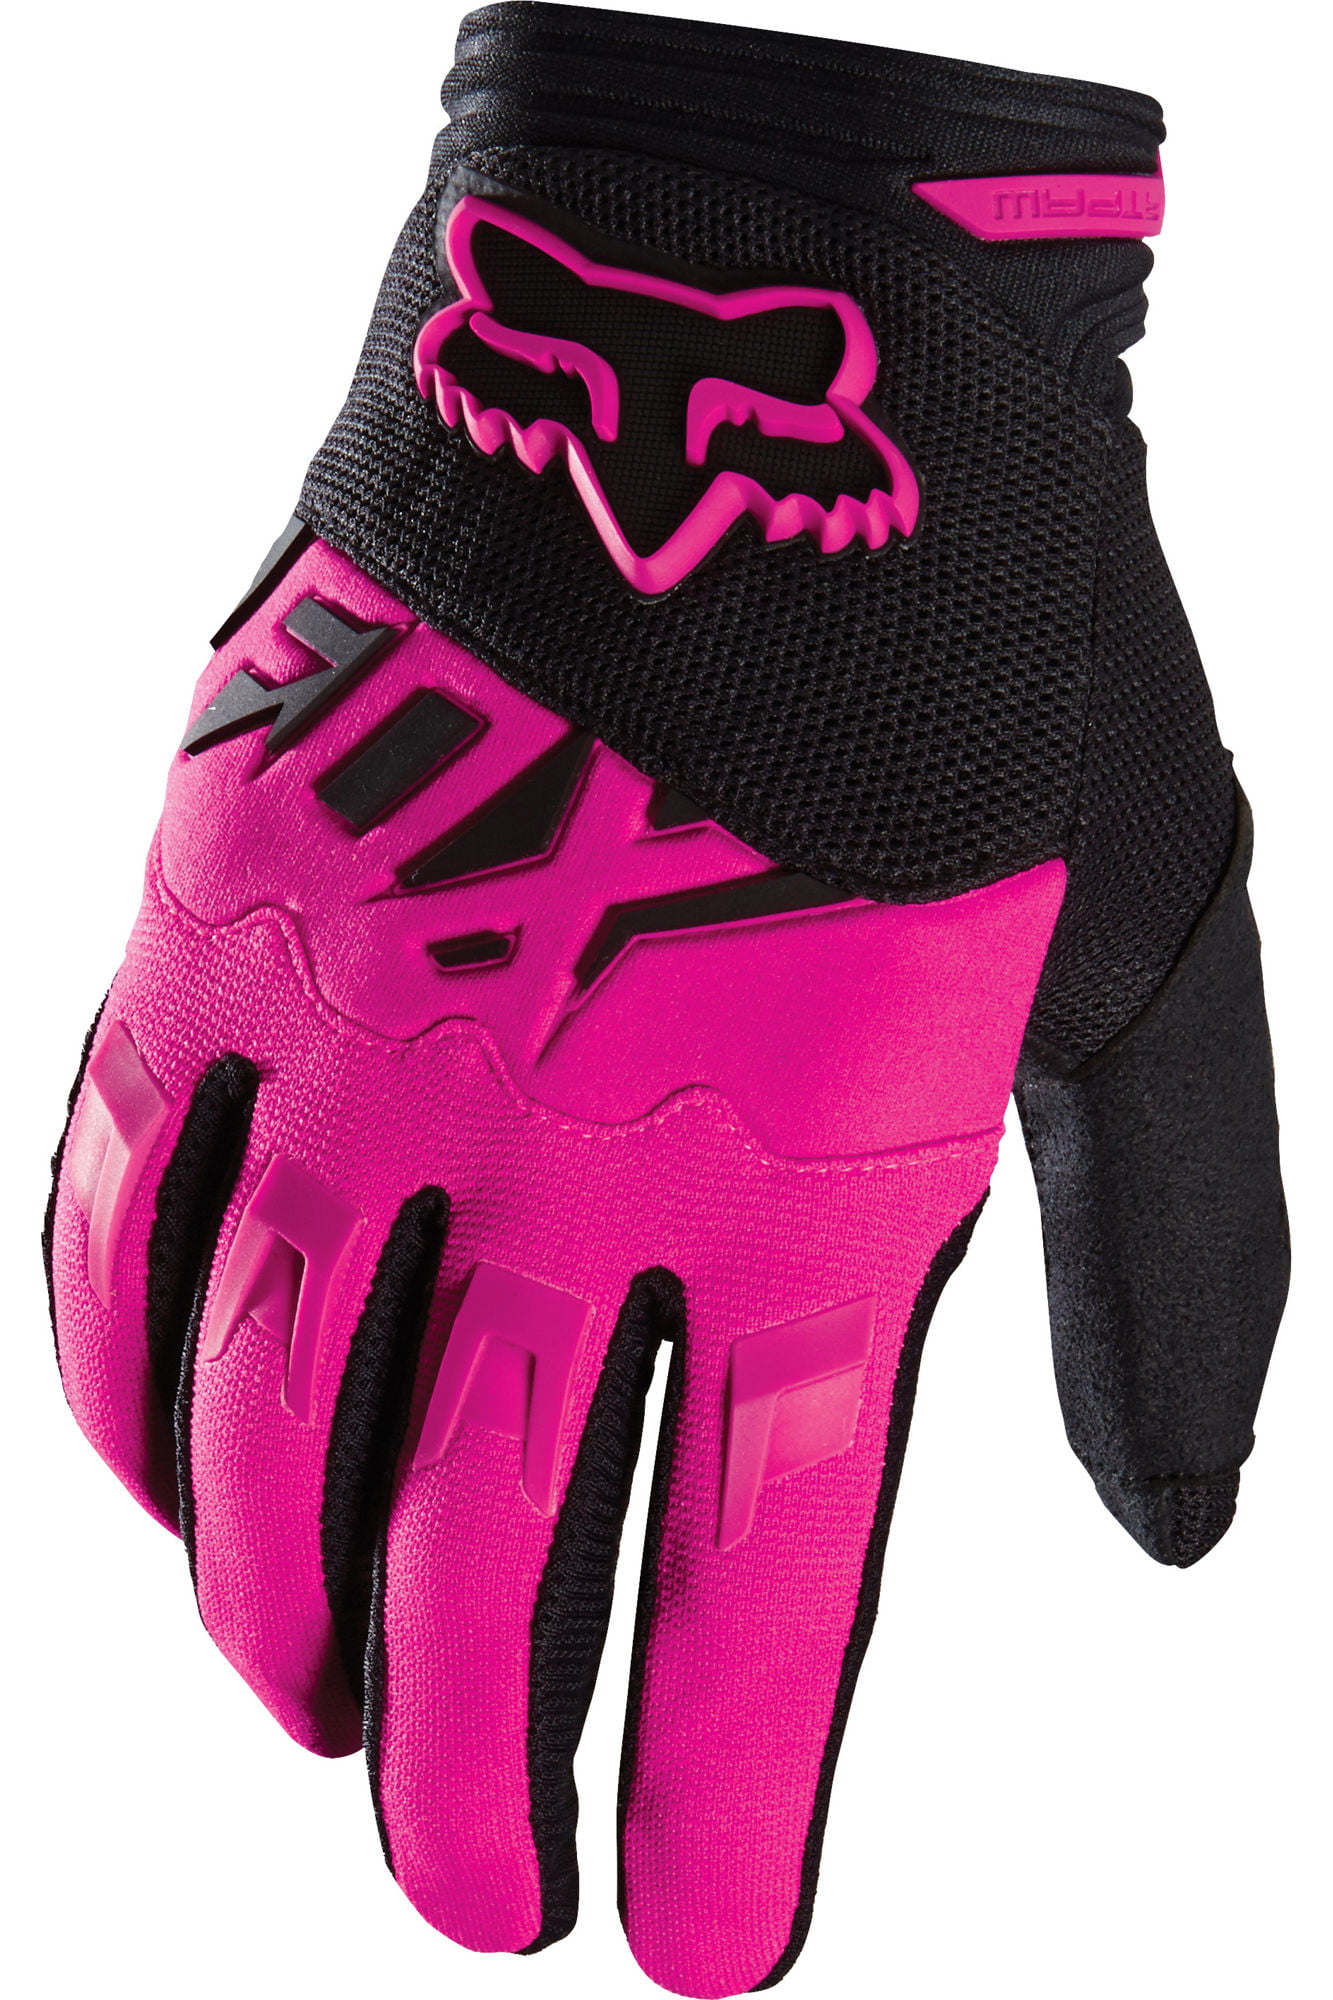 Fox Racing Glove Dirtpaw Gloves Motocross Race DirtBike OffRoad Cycling Non-slip 